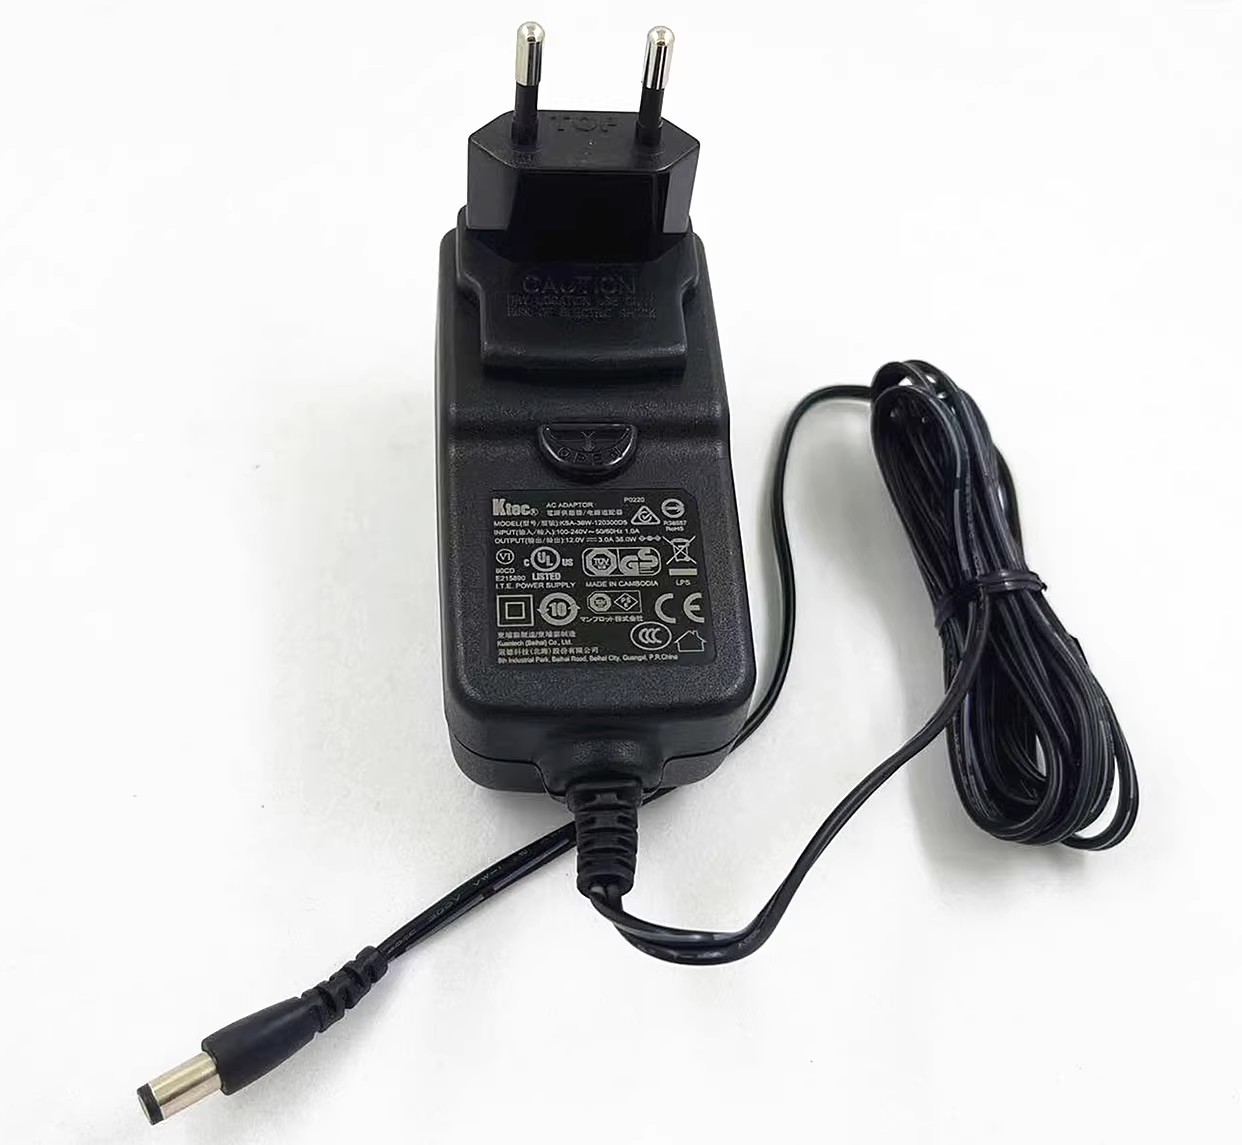 *Brand NEW* Ktec 100-240V 50-60Hz 12.0V 3.0A 36.0W AC/DC ADAPTER KSA-36W-120300D5 POWER Supply - Click Image to Close